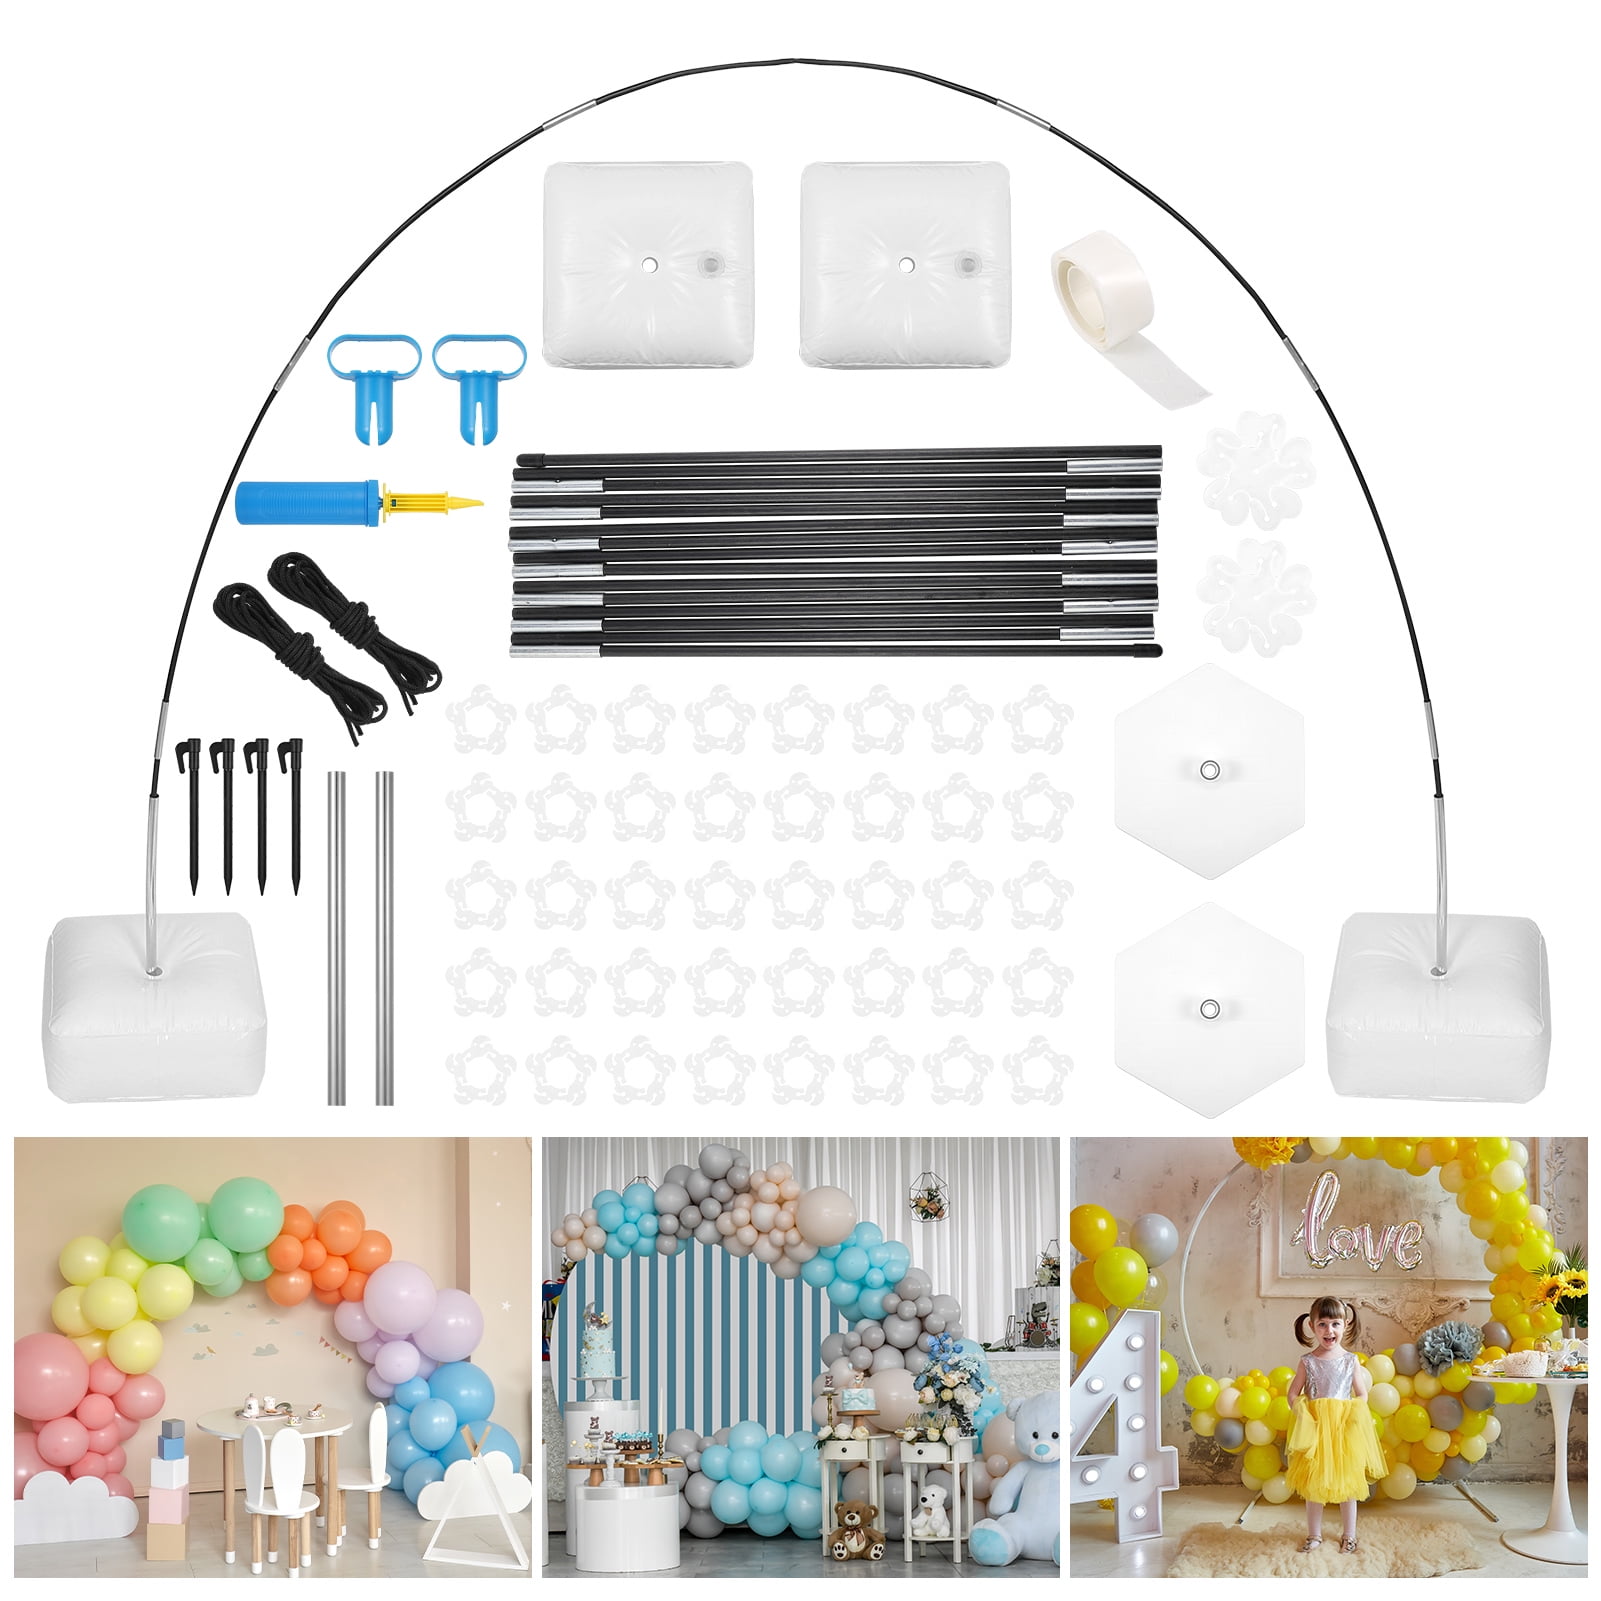 Balloon Arch Kit, Balloon Arch Kit With Base, Hand Pump Ground Safety Rope  Nail Balloon Knotter, For Wedding, Birthday Party Supplies And Decorations